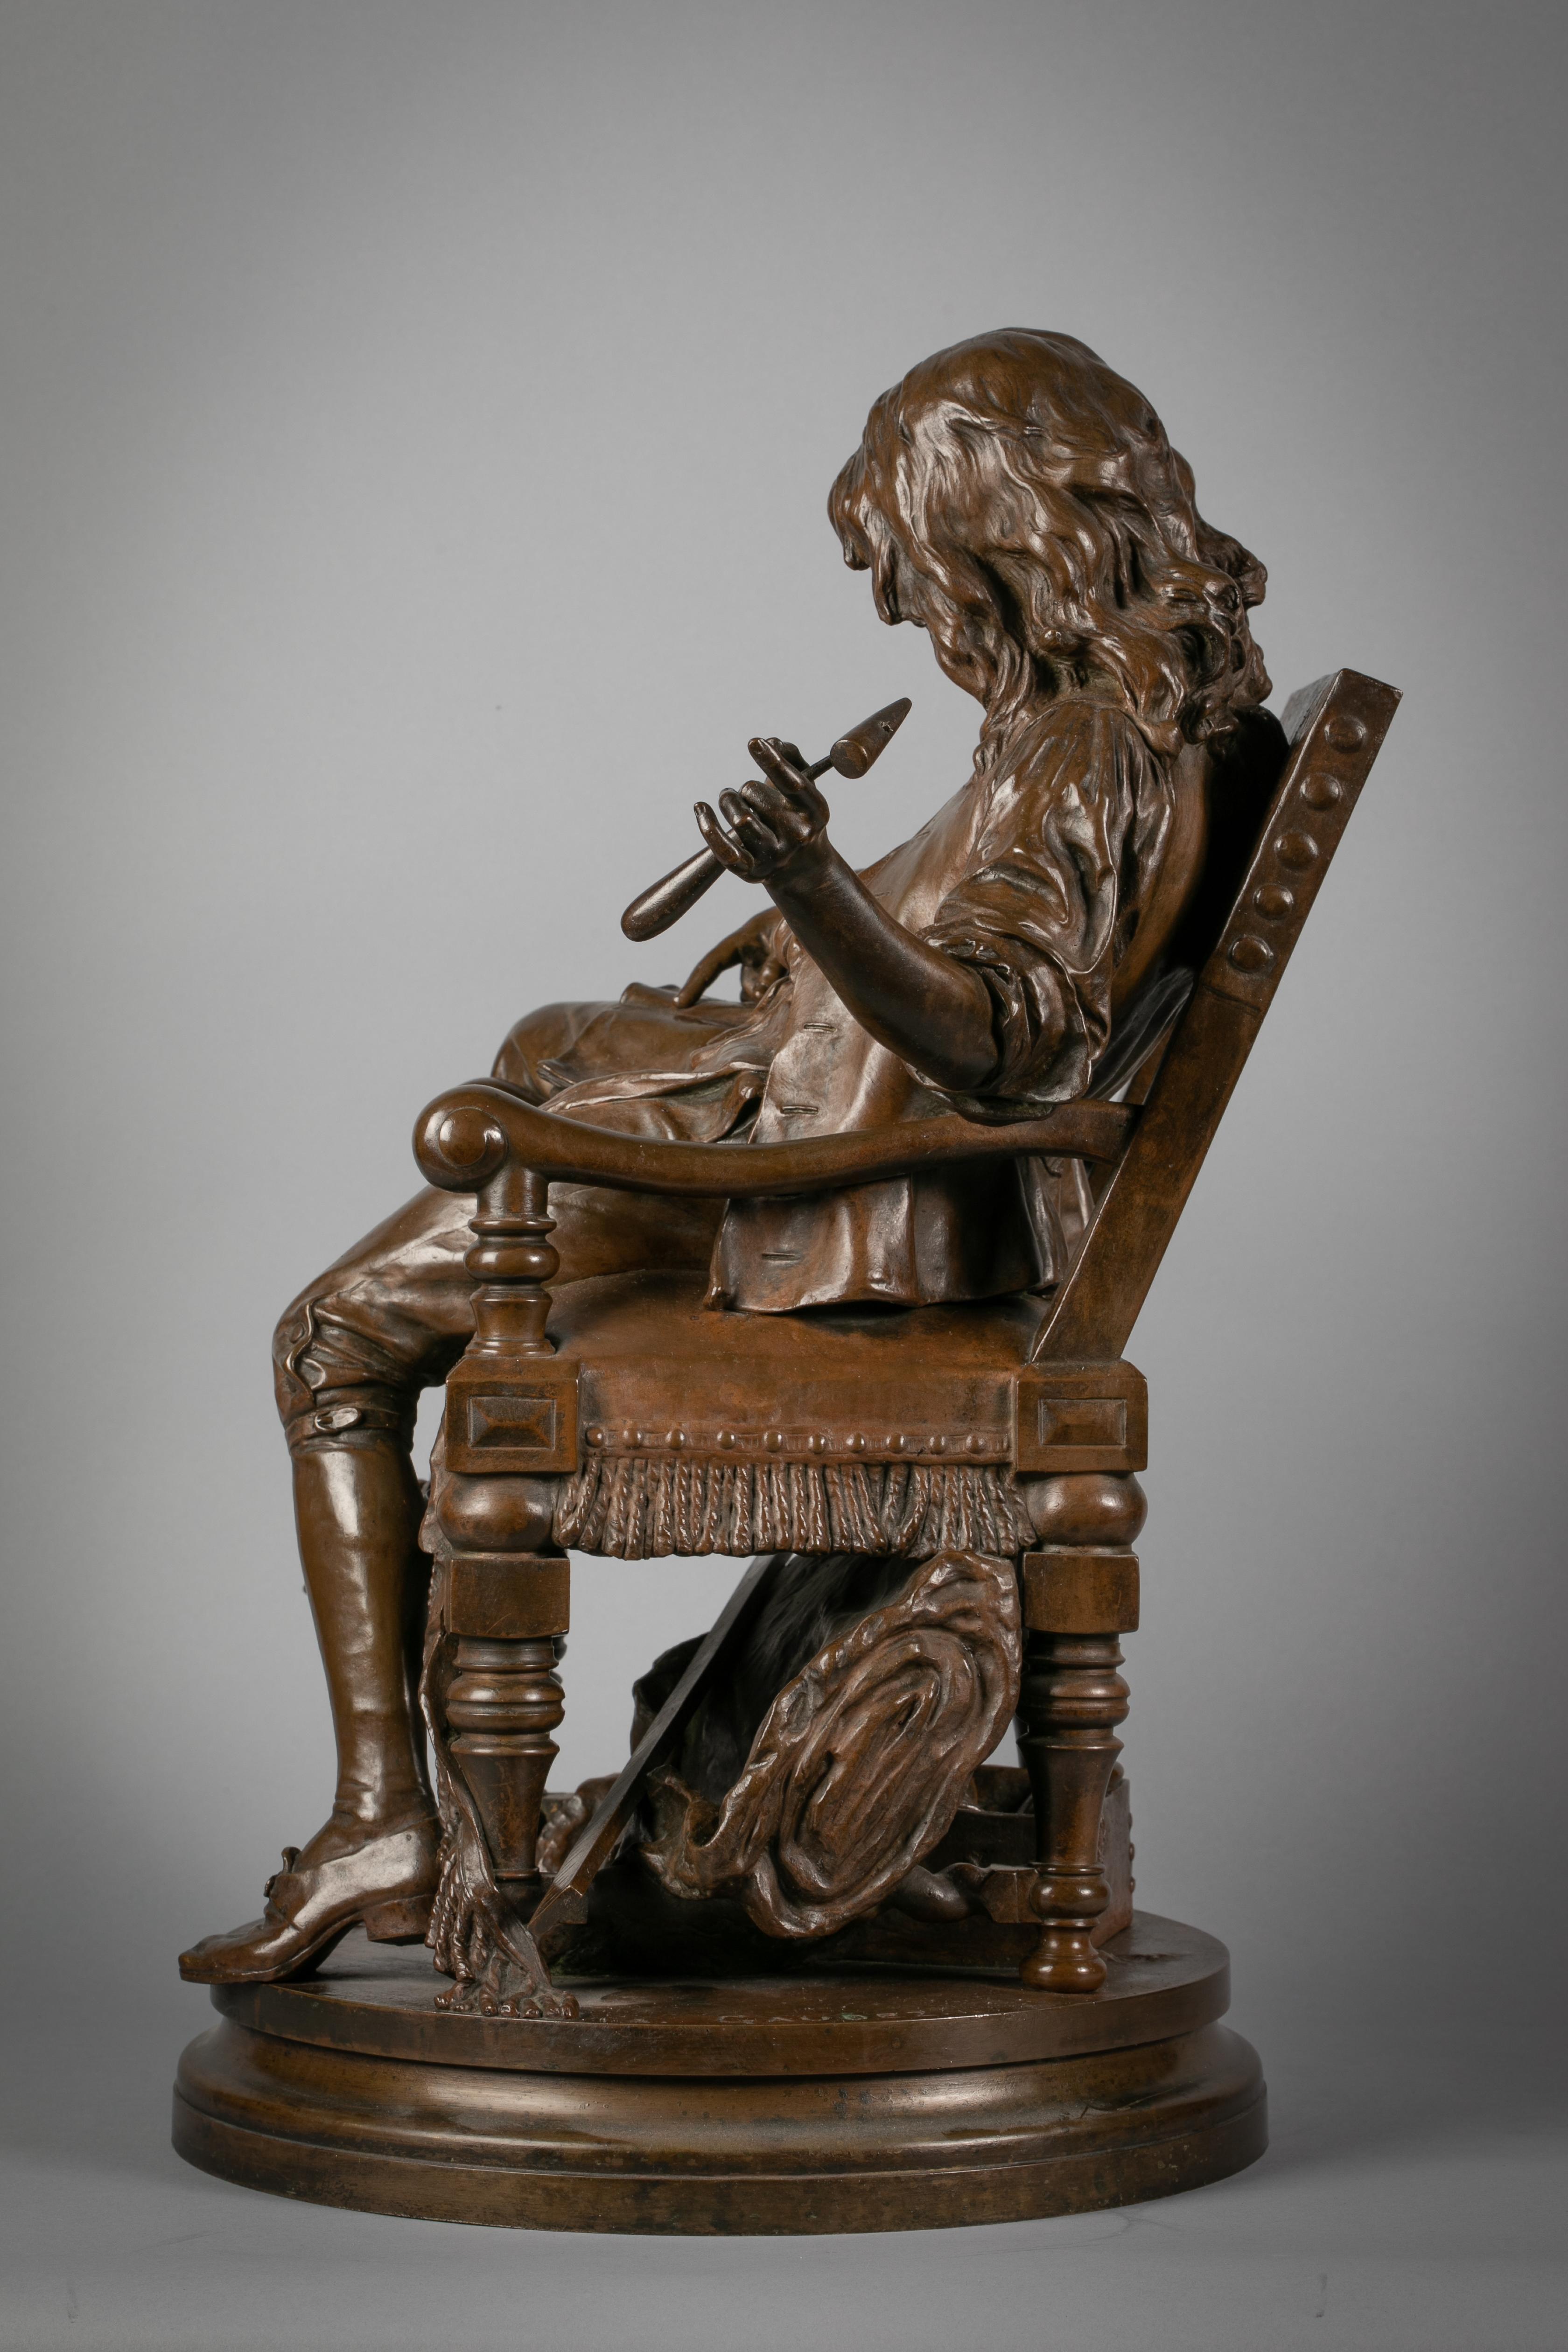 Boy in a seated pose with an open book on his lap. On a rotating circular plinth. With this model, Gaudez (d.1902) recreates a well-known incident in the life of an upholsterer's apprentice who would grow up to become the renowned French actor and